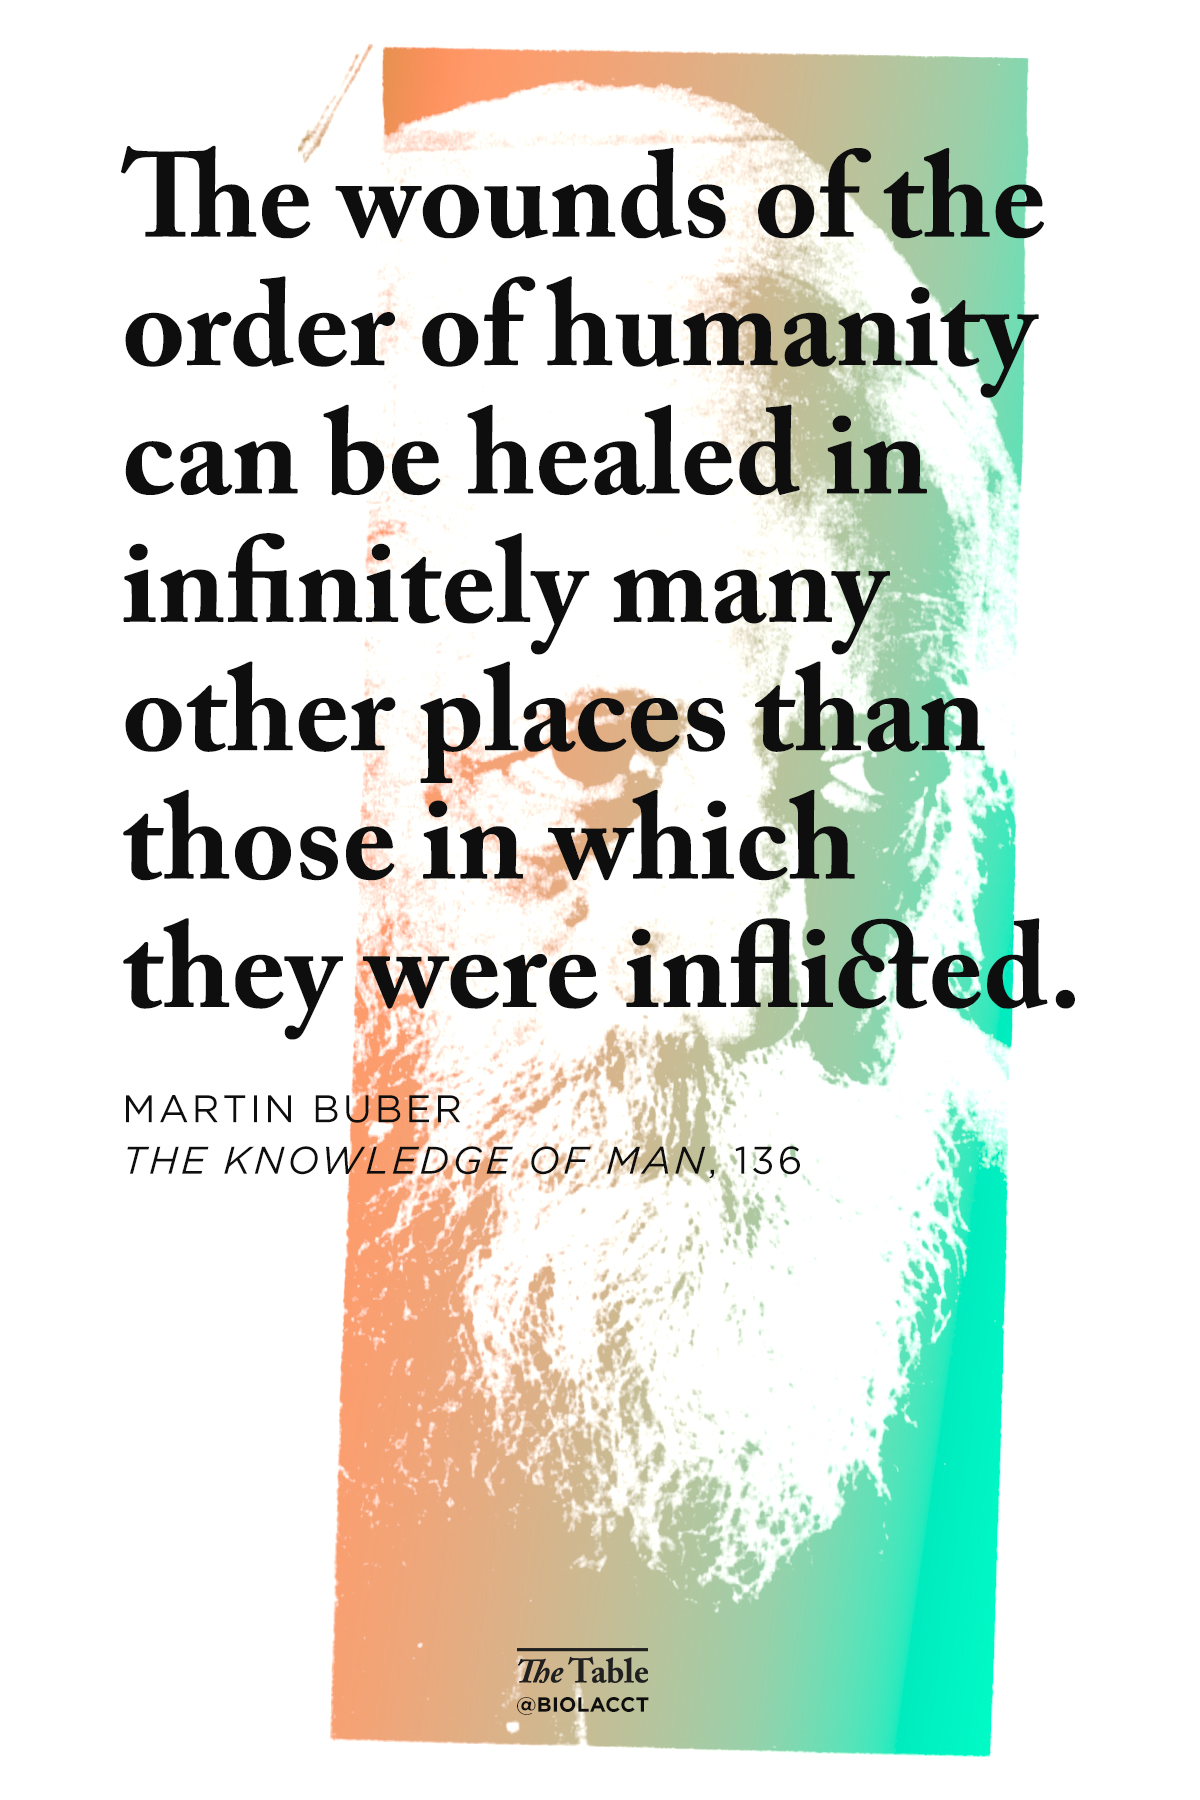 Quote: The wounds of the order of humanity can be healed in infinitely many other places than those in which they were inflicted. Martin Buber